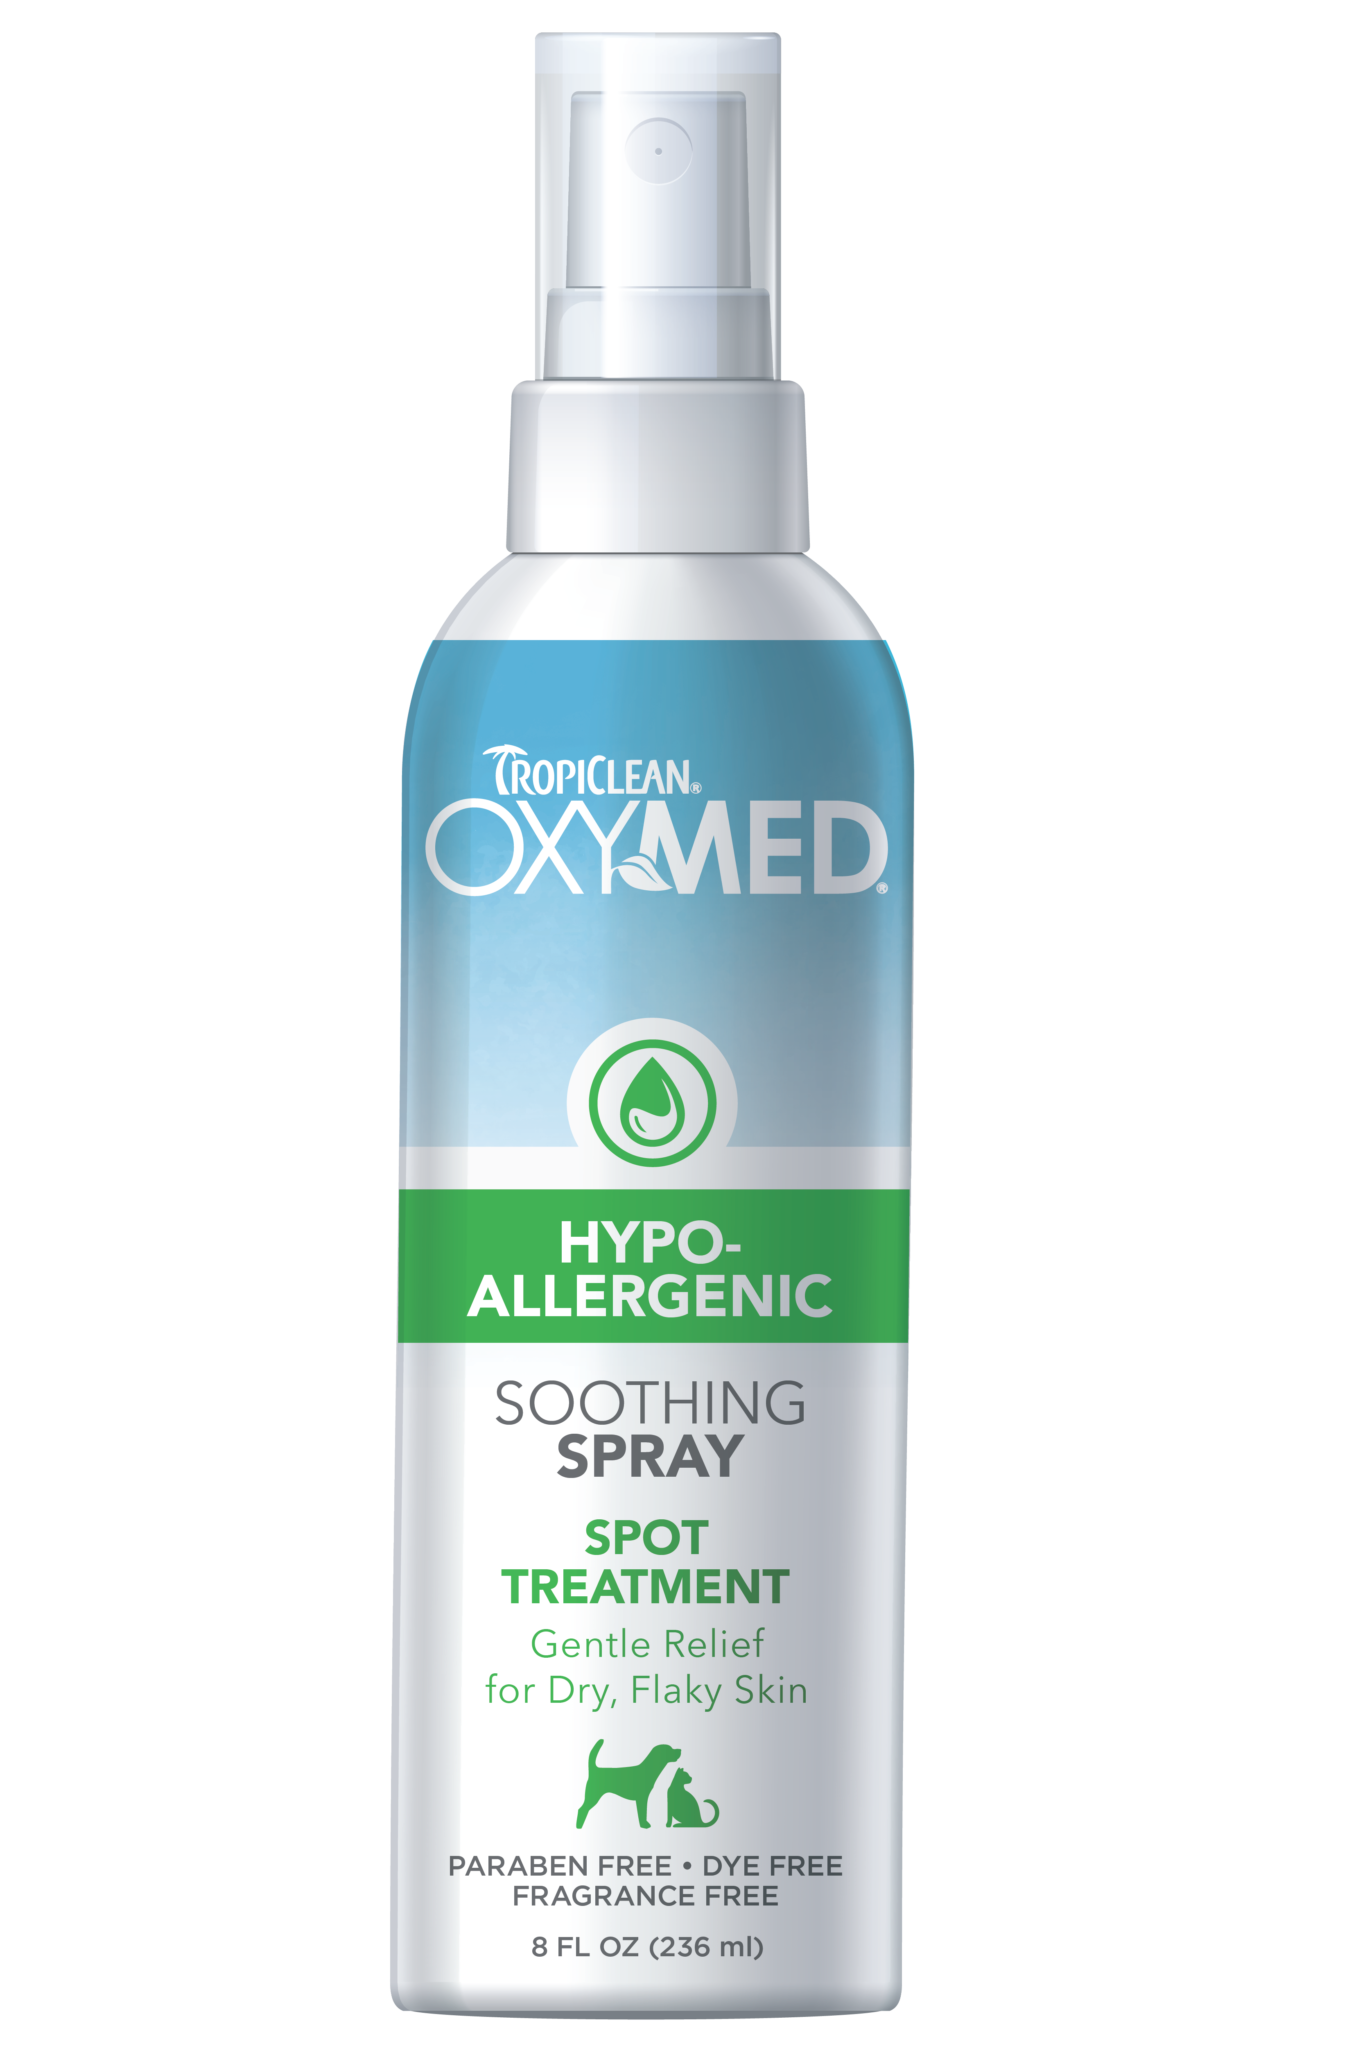 Tropiclean Oxymed Hypo-allergenic Soothing Spray